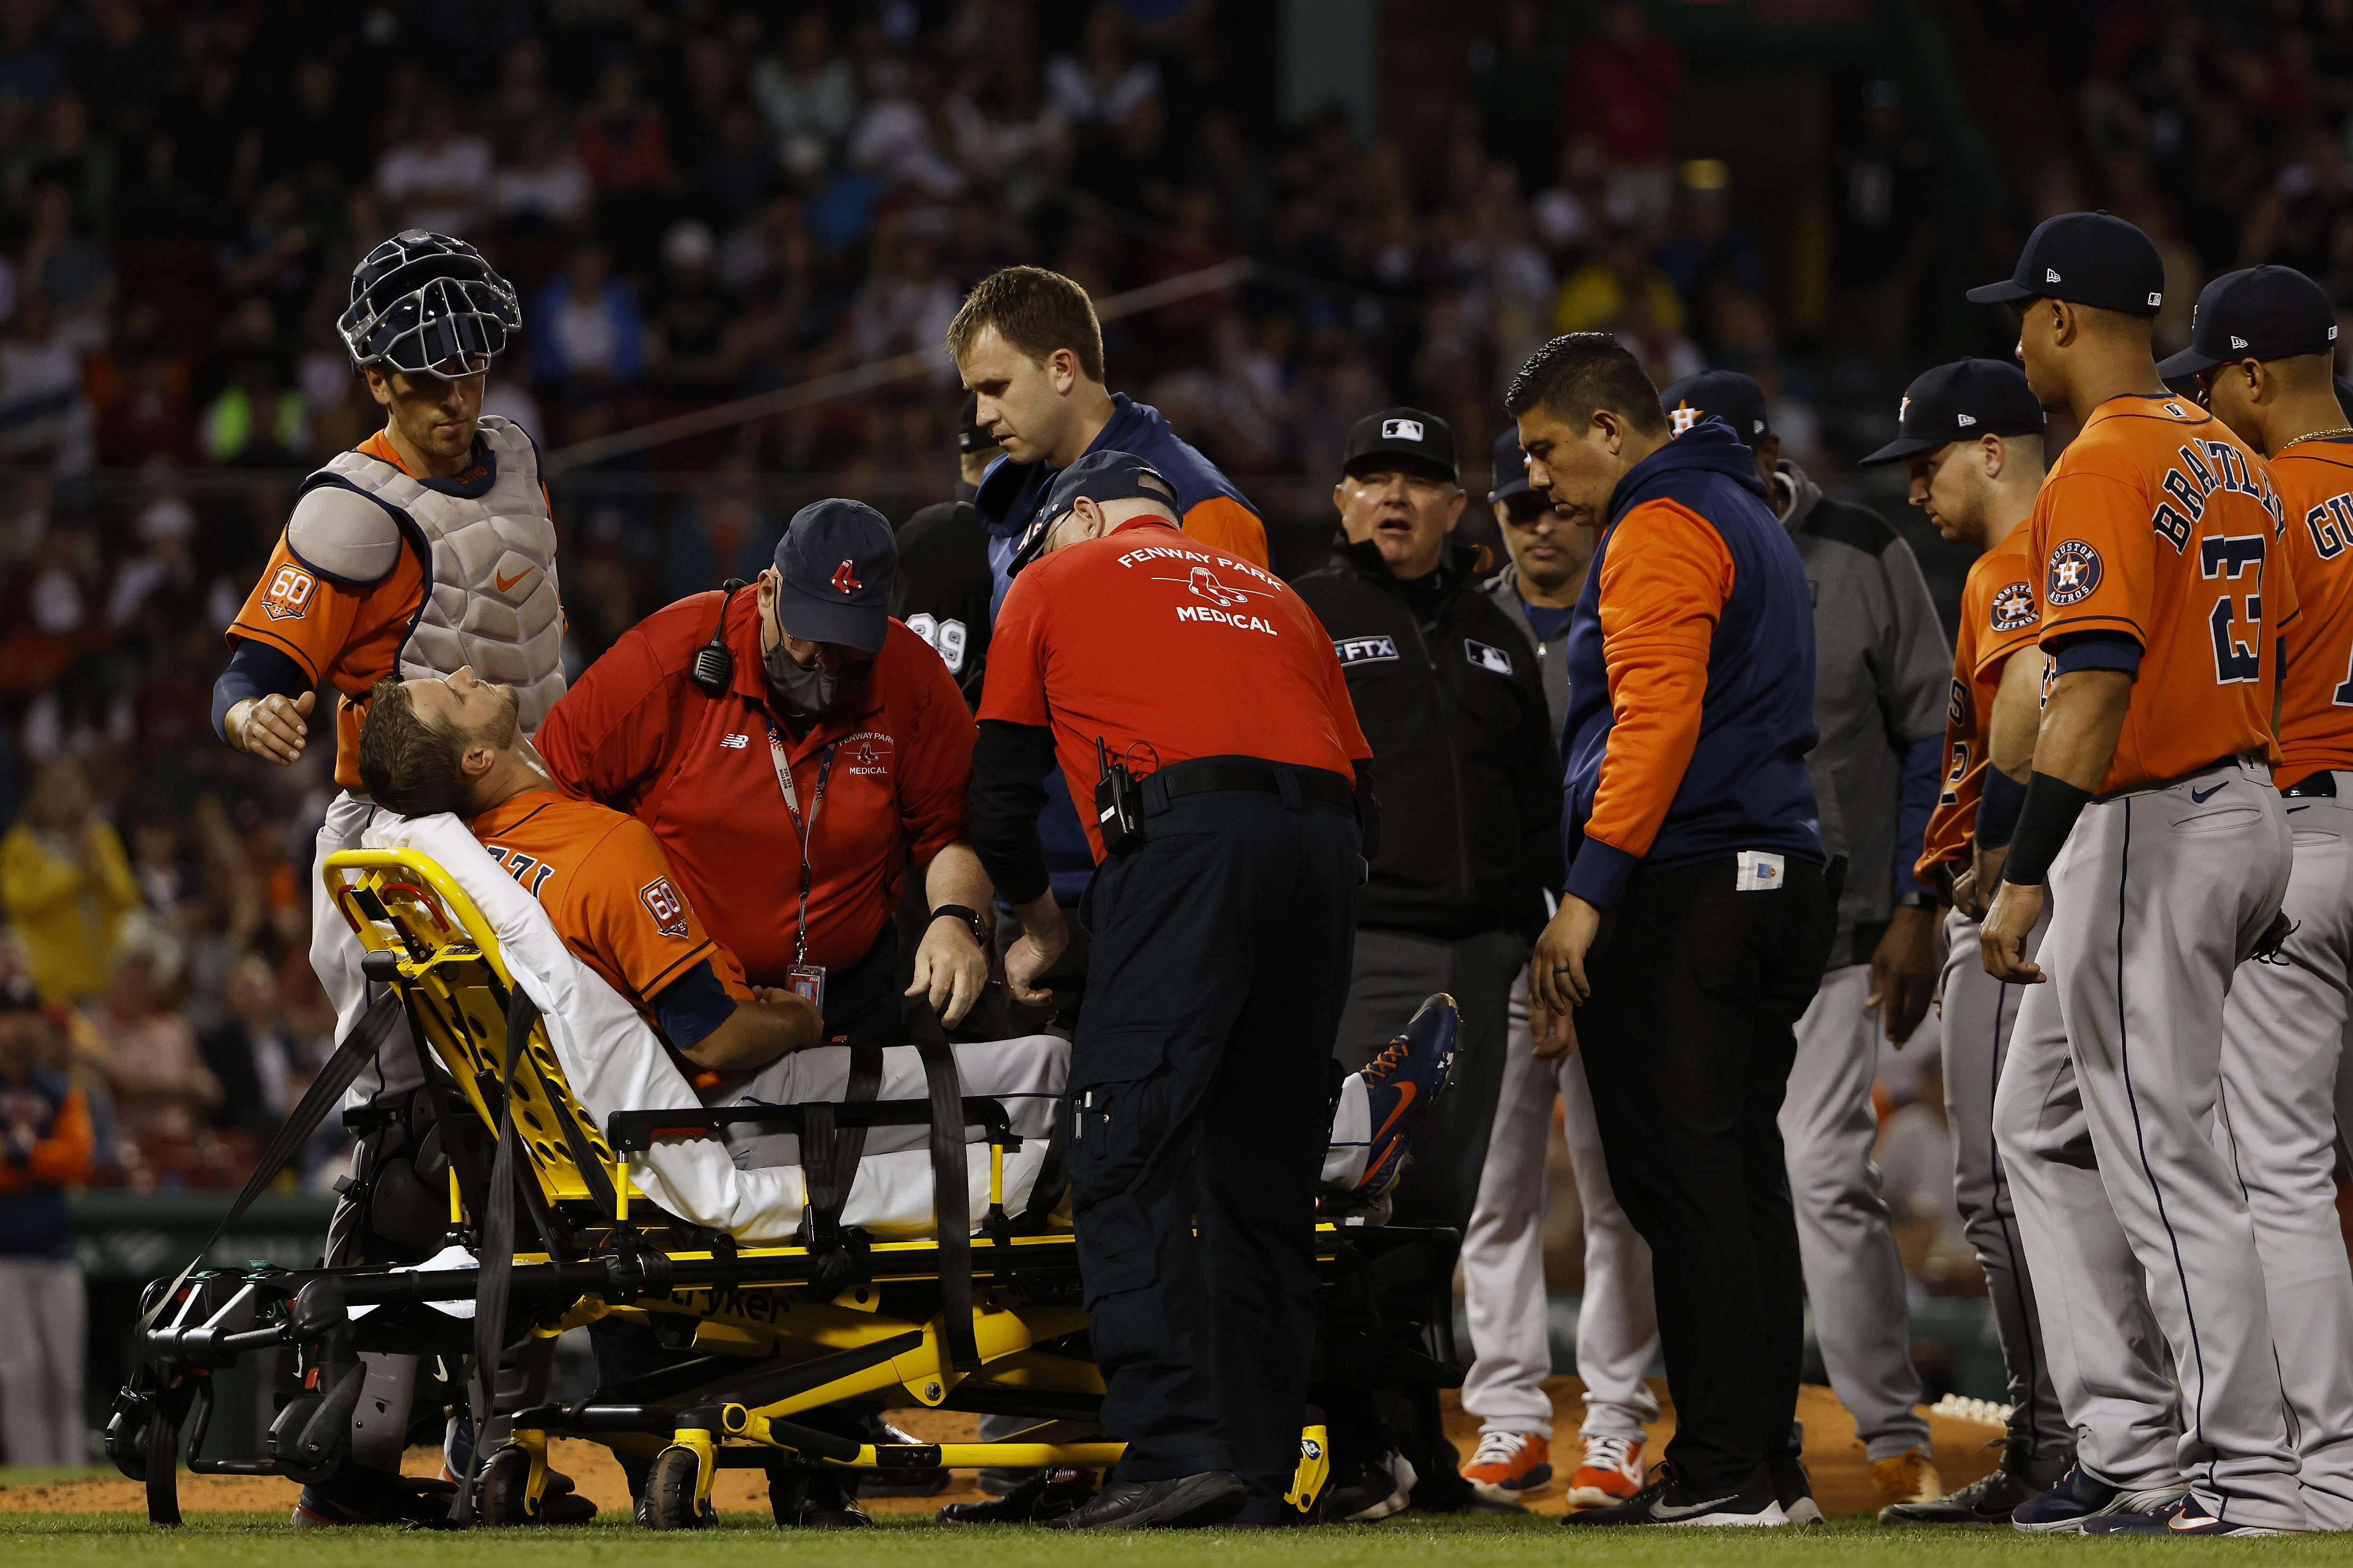 Pitcher Jake Odorizzi #17 of the Houston Astros is buckled onto a stretcher after being injured trying to get off the mound to cover first base on a ground out by Enrique Hernandez of the Boston Red Sox during the sixth inning at Fenway Park. Credit: AFP Photo